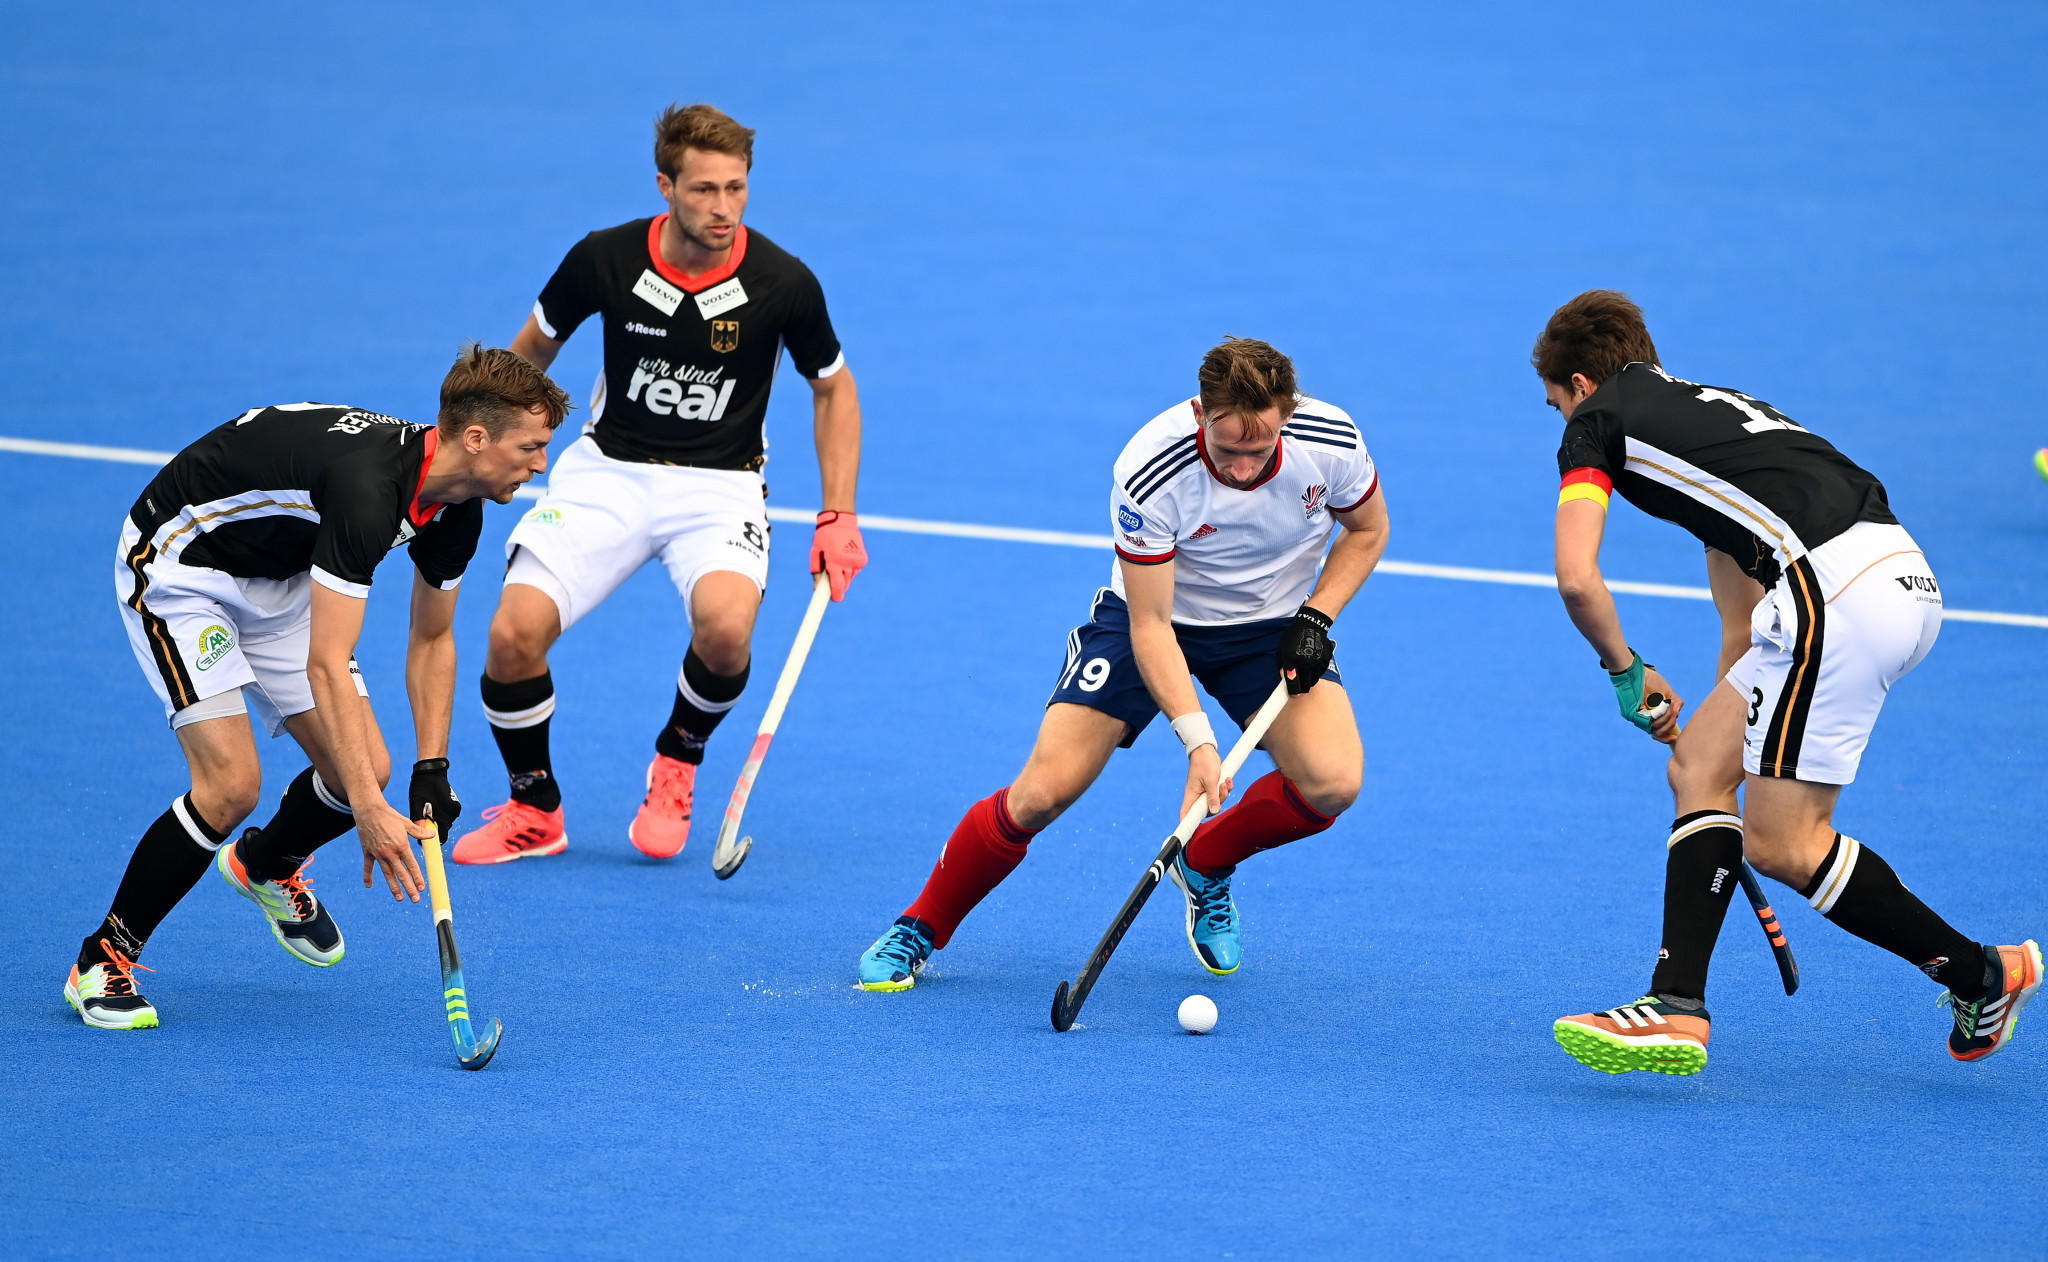 Britain sealed their second victory in as many days over Germany in the FIH Pro League in London this evening ©Getty Images